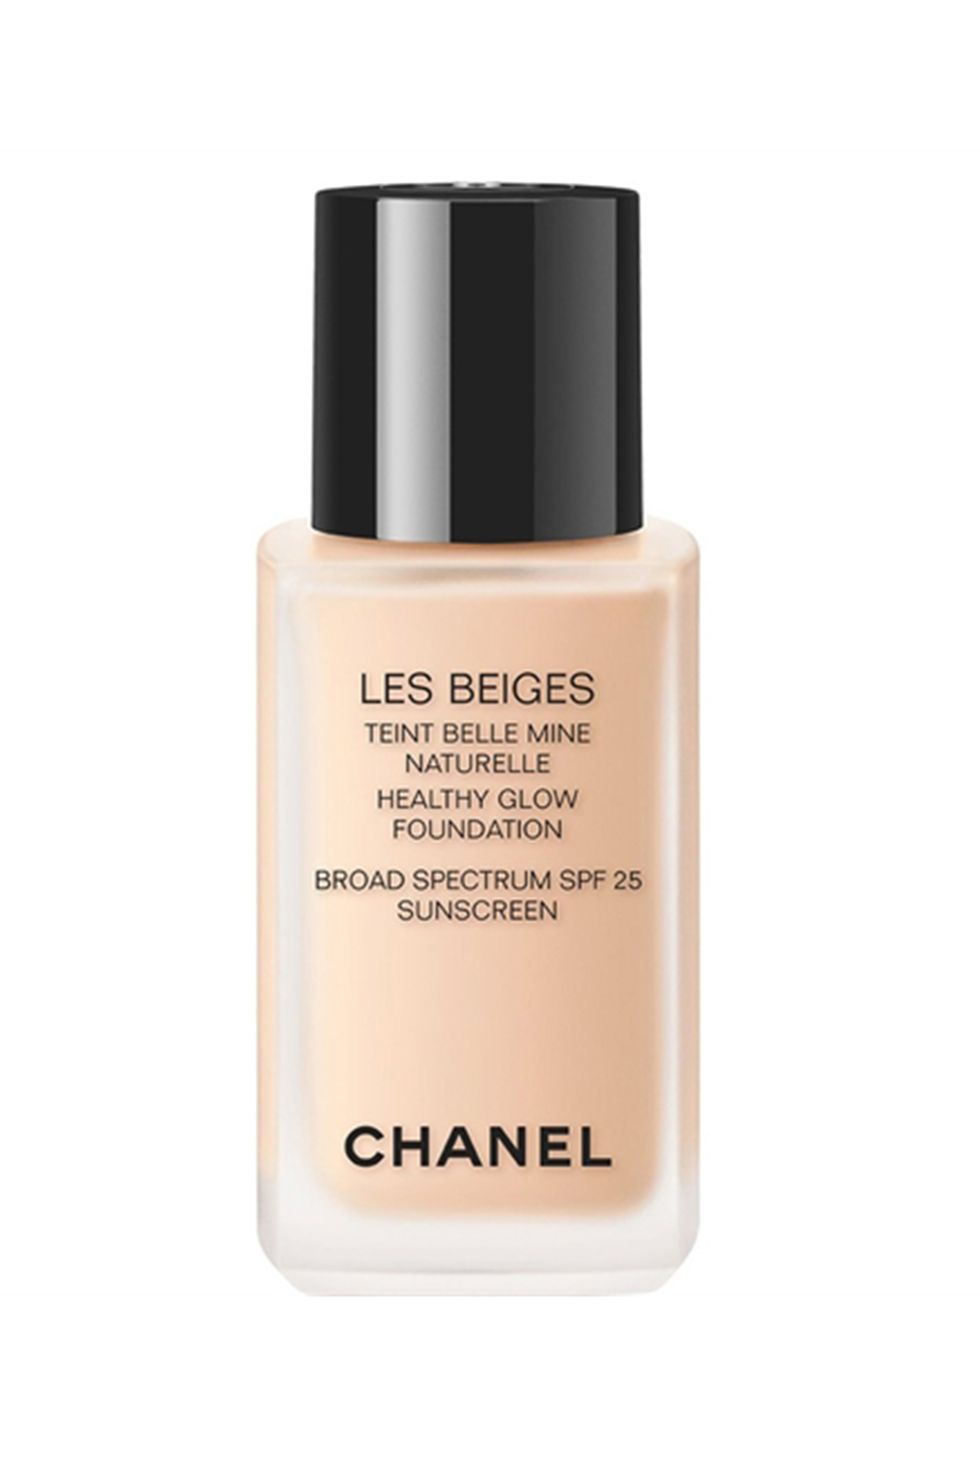 <p>Sometimes you have to think a little bit outside of the box when it comes to contouring, just ask Patrick Ta, makeup guru to Kendall Jenner, Olivia Munn, and&nbsp;Chrissy Teigen<span class="redactor-invisible-space"></span>. While not technically a palette, Patrick's contour go-to, Chanel Les Beiges Foundation, "leaves an effortless shadow and bronzes at the same time."</p><p>Chanel Les Beiges Healthy Glow Foundation, $60, <u data-redactor-tag="u"><a href="http://www.chanel.com/en_US/fragrance-beauty/makeup-les-beiges-les-beiges-140502">Chanel.com</a></u></p>